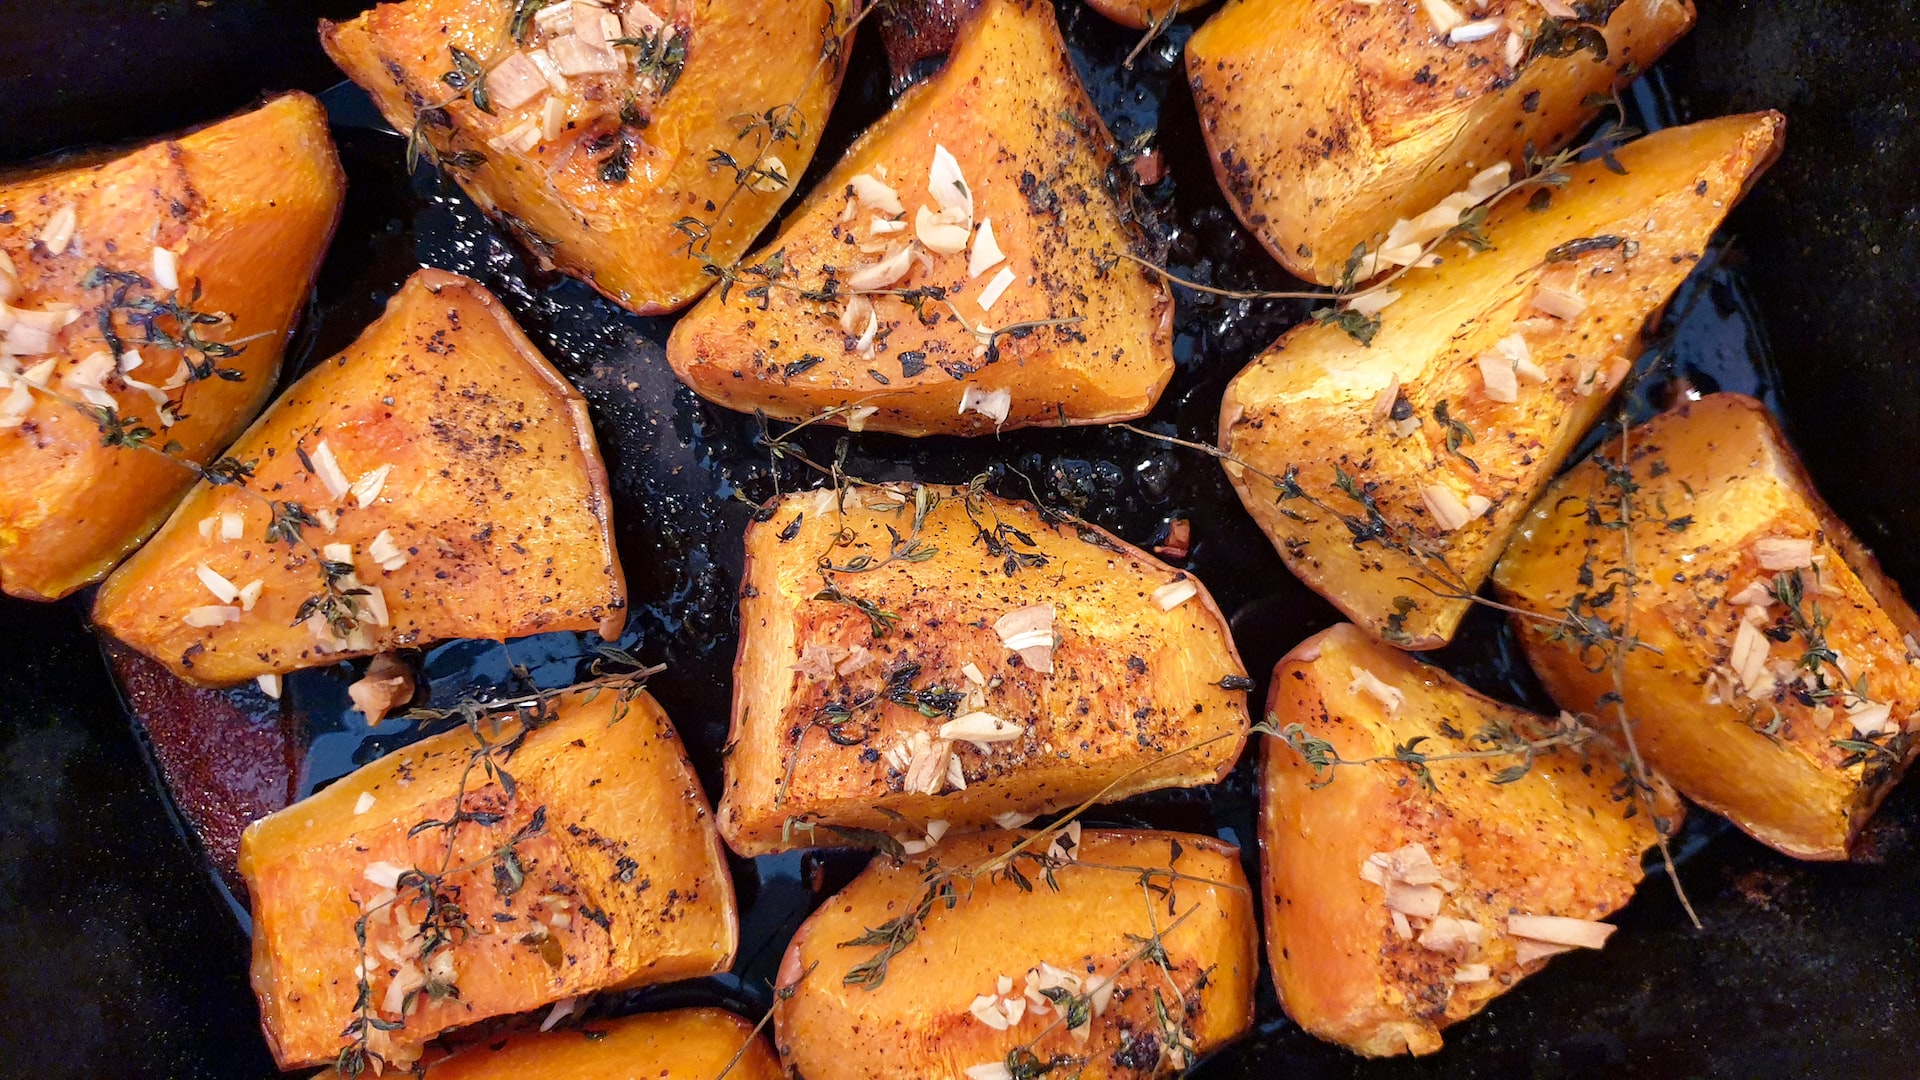 Are Sweet Potatoes Really Worth the Hype?